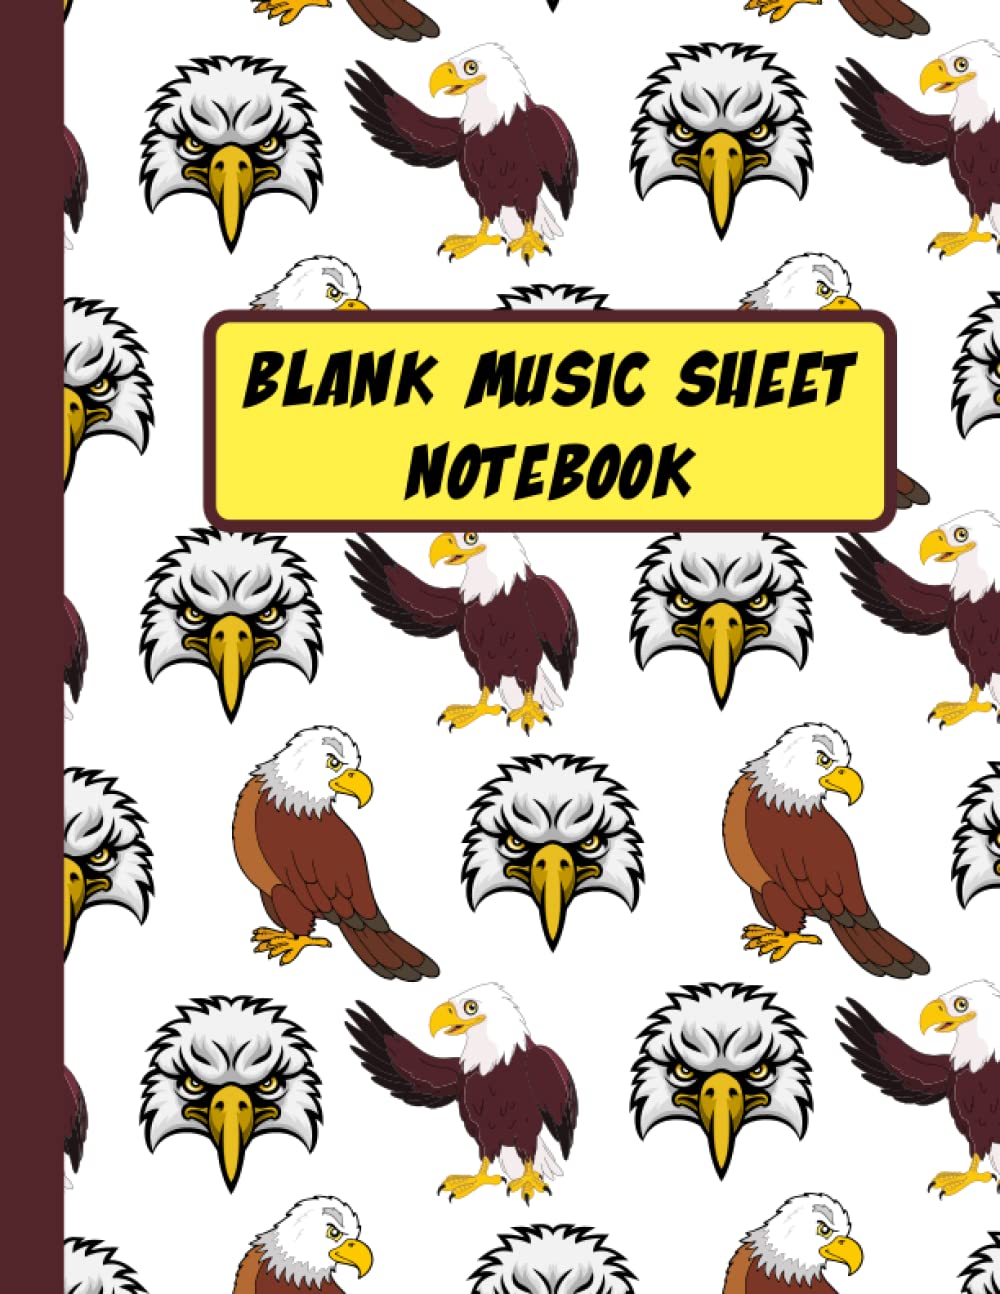 Blank Music Sheet Notebook: Manuscript Paper for Songwriting and Composition for Music Subject or Class | American Eagle Pattern | Eagle Gifts for Boys